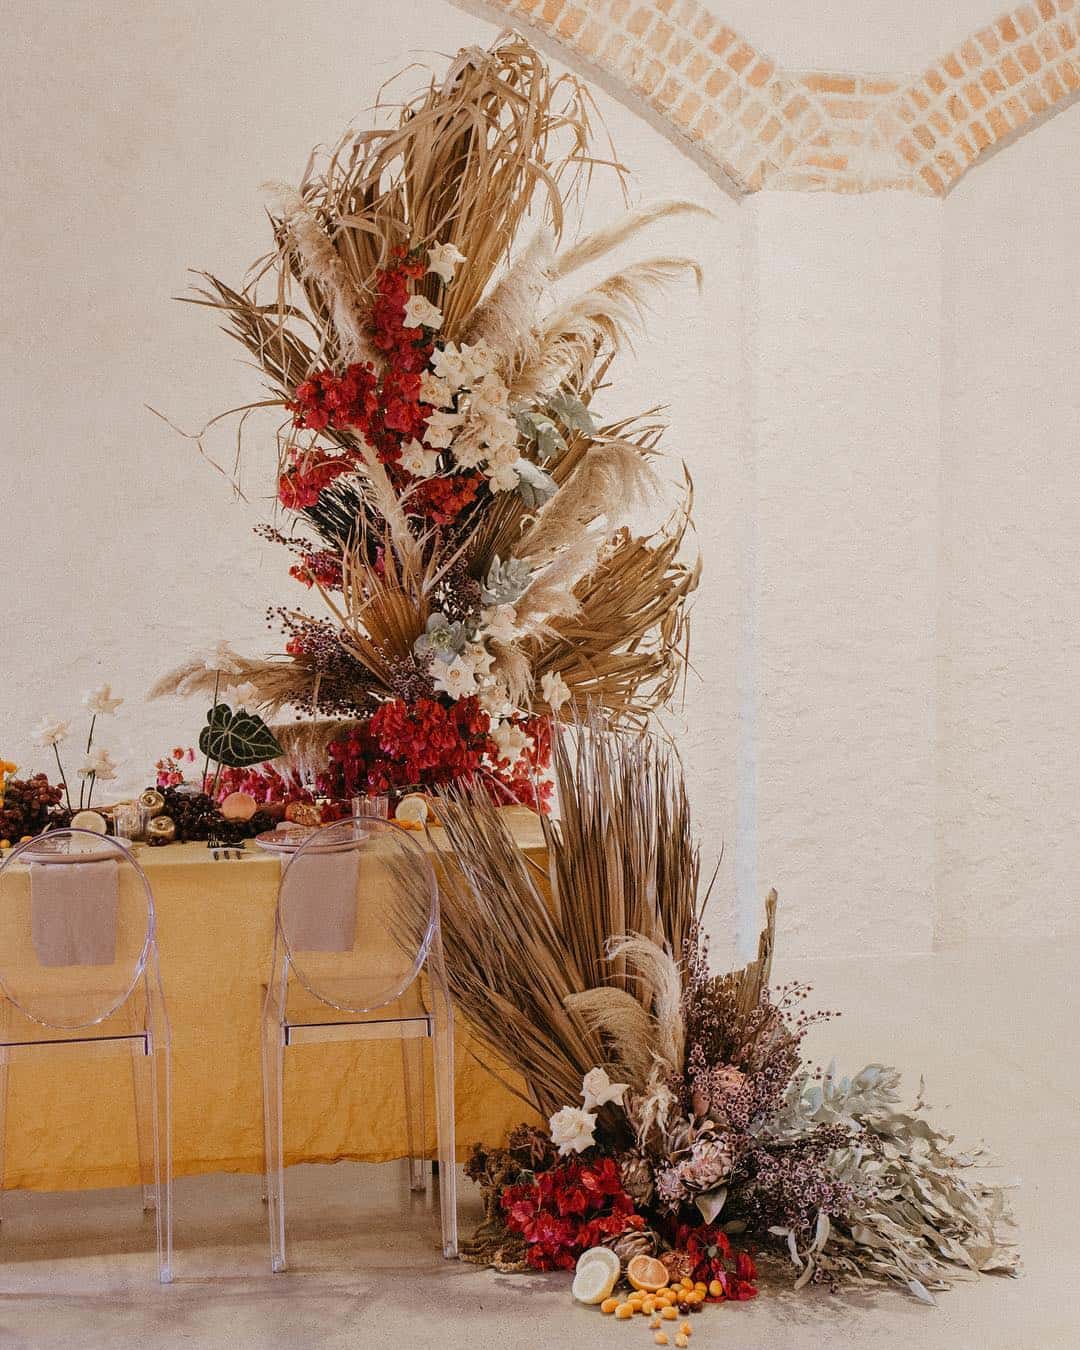 dramatic floral installation featuring dried palm leaves